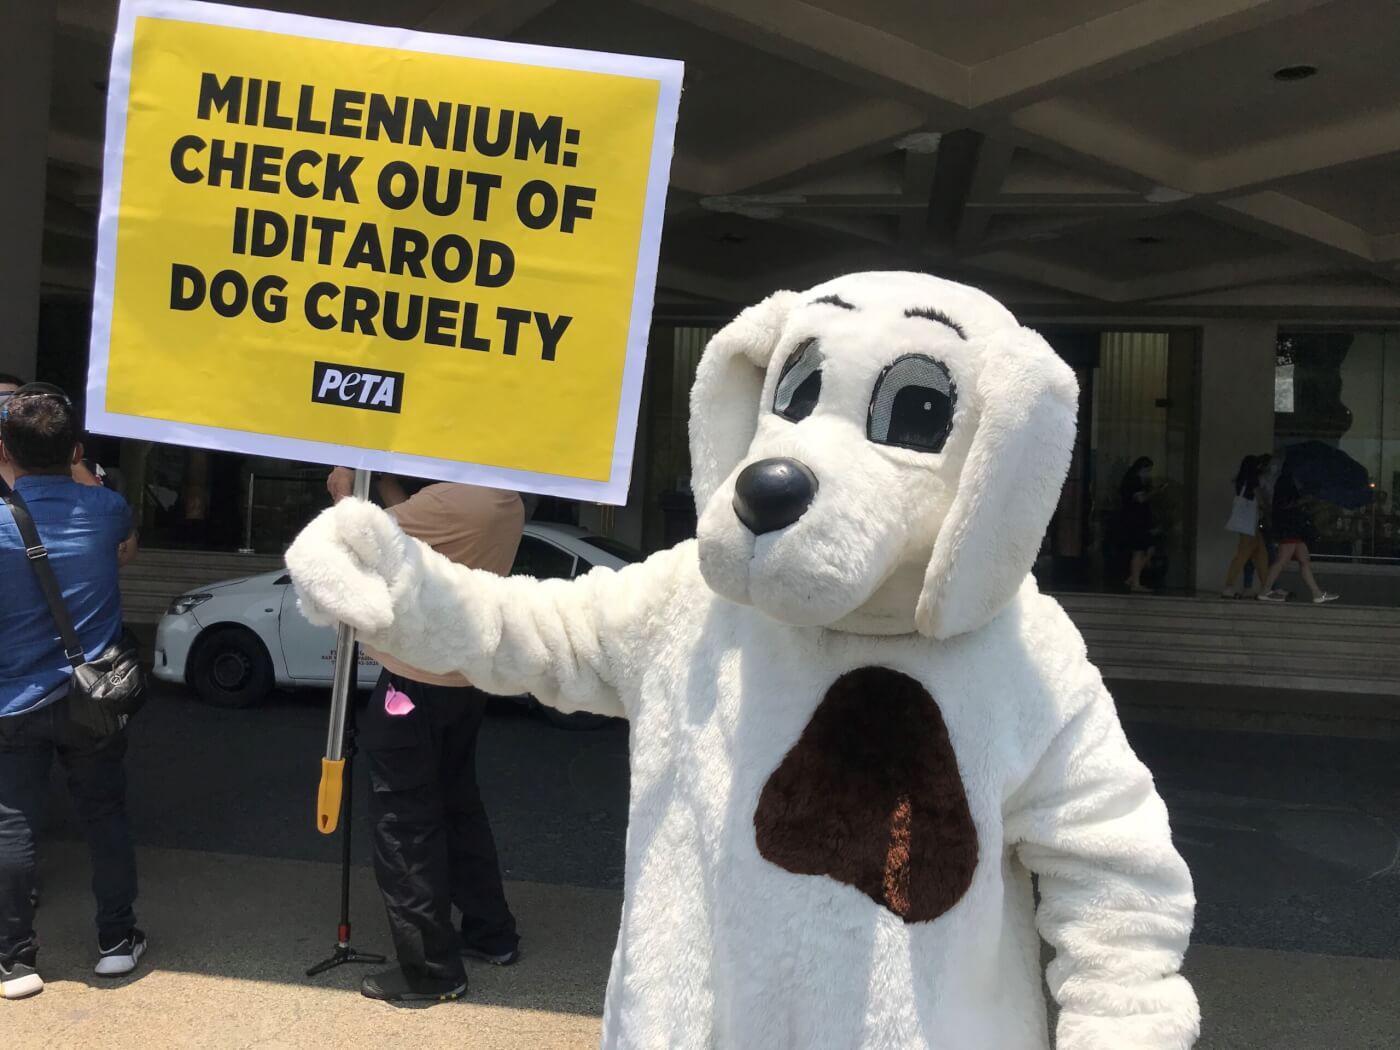 Over 150 Dogs Dead From the Iditarod—PETA ‘Dog’ Urges Millennium Hotels to Stop Sponsoring Cruelty!